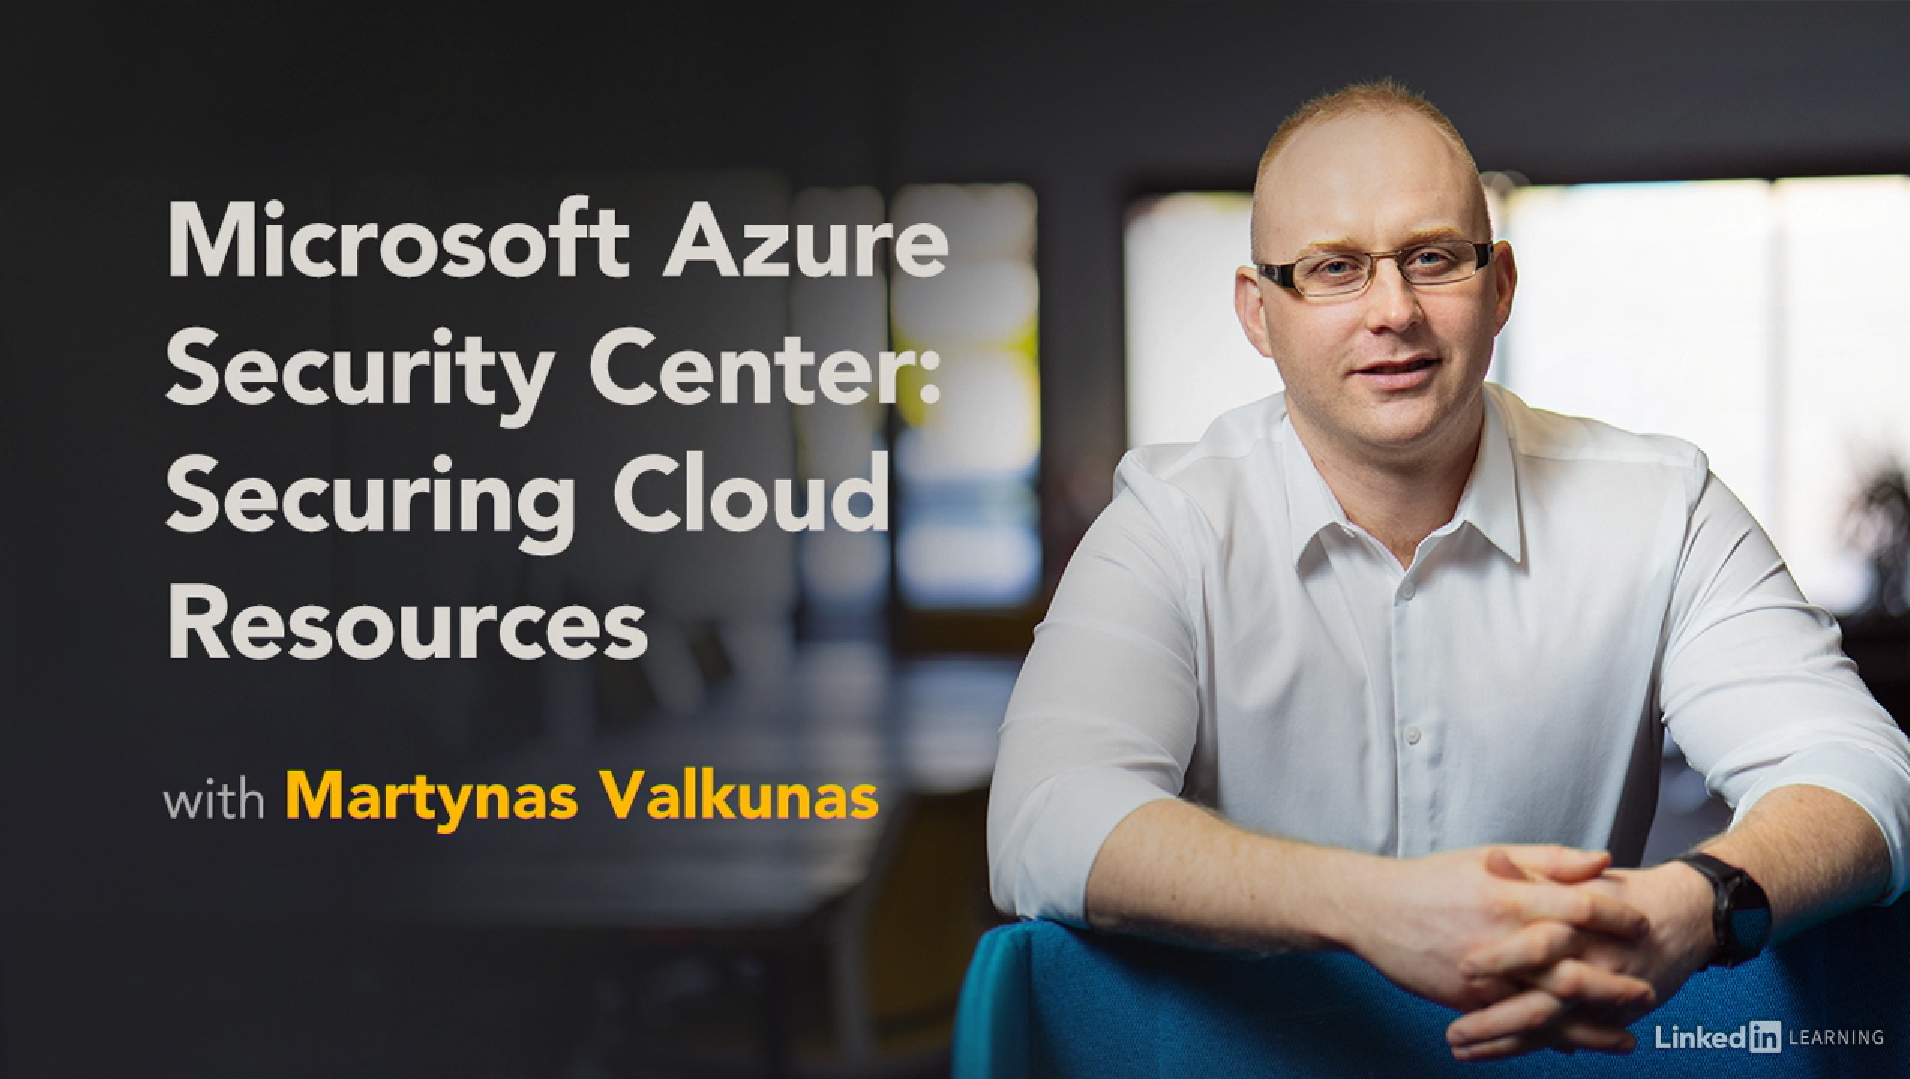 A photo of Martynas Valkunas next to the text "Microsoft Azure Security Center: Securing Cloud Resources"